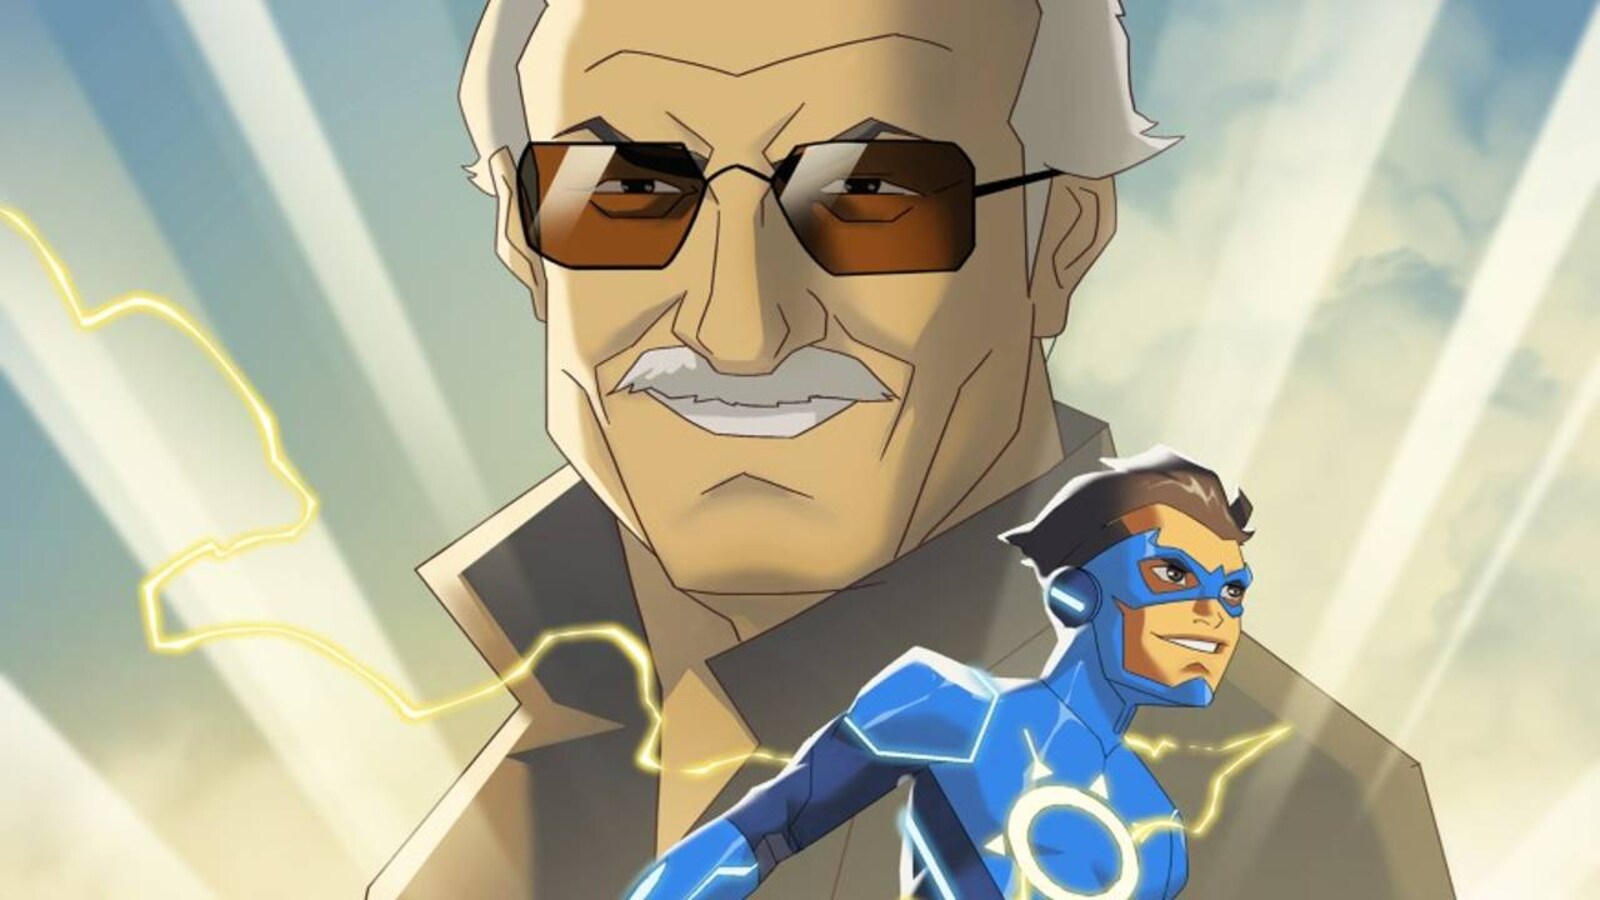 Birth centenary: Remembering Stan Lee, the greatest superhero of them all